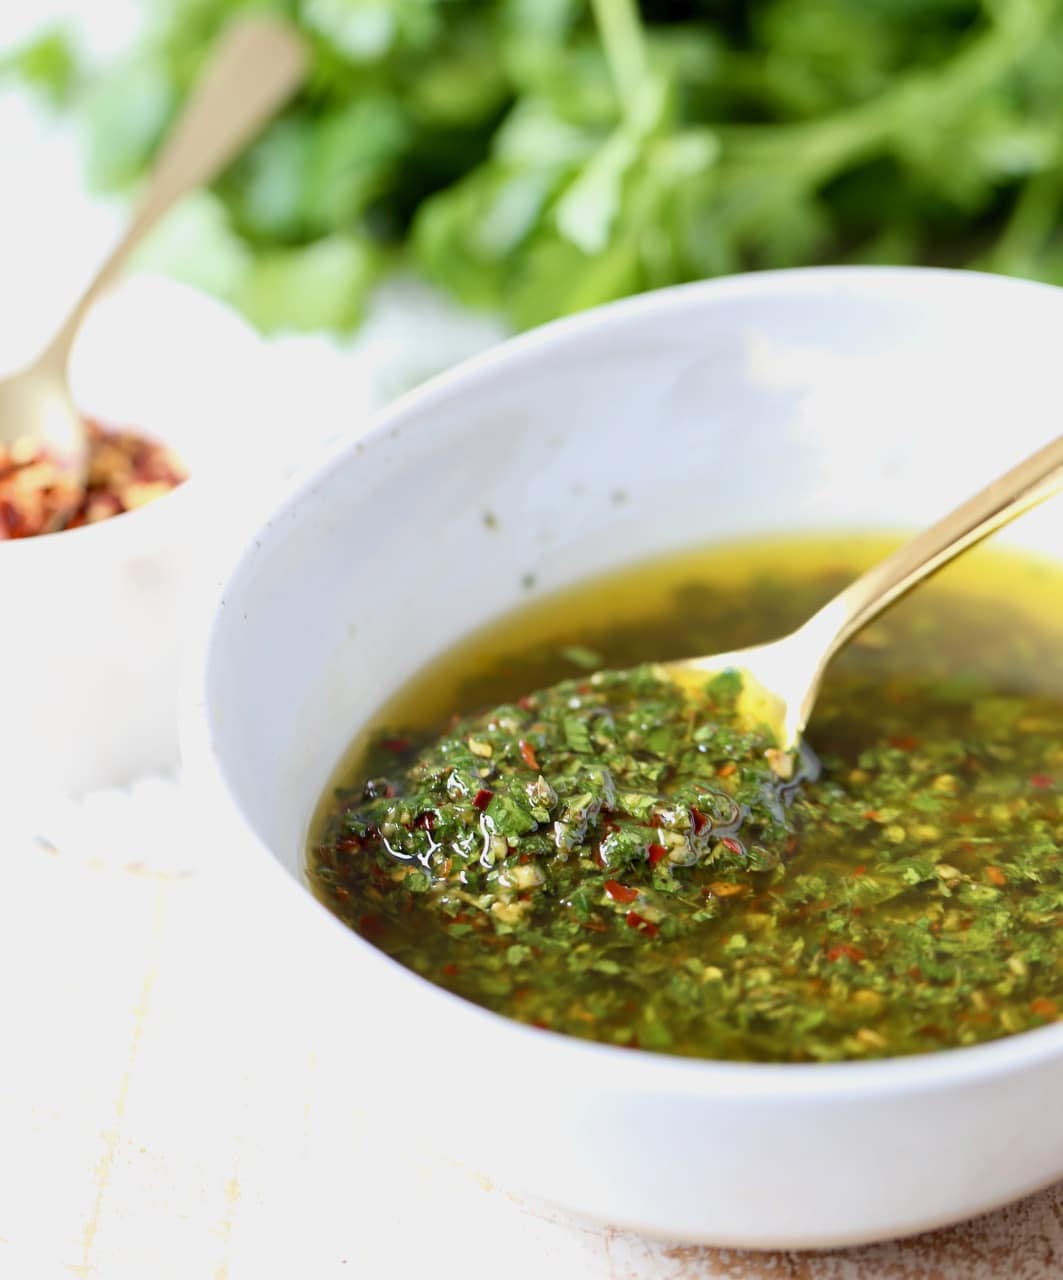 Argentinian Chimichurri Sauce with Parsley, Garlic and Olive Oil